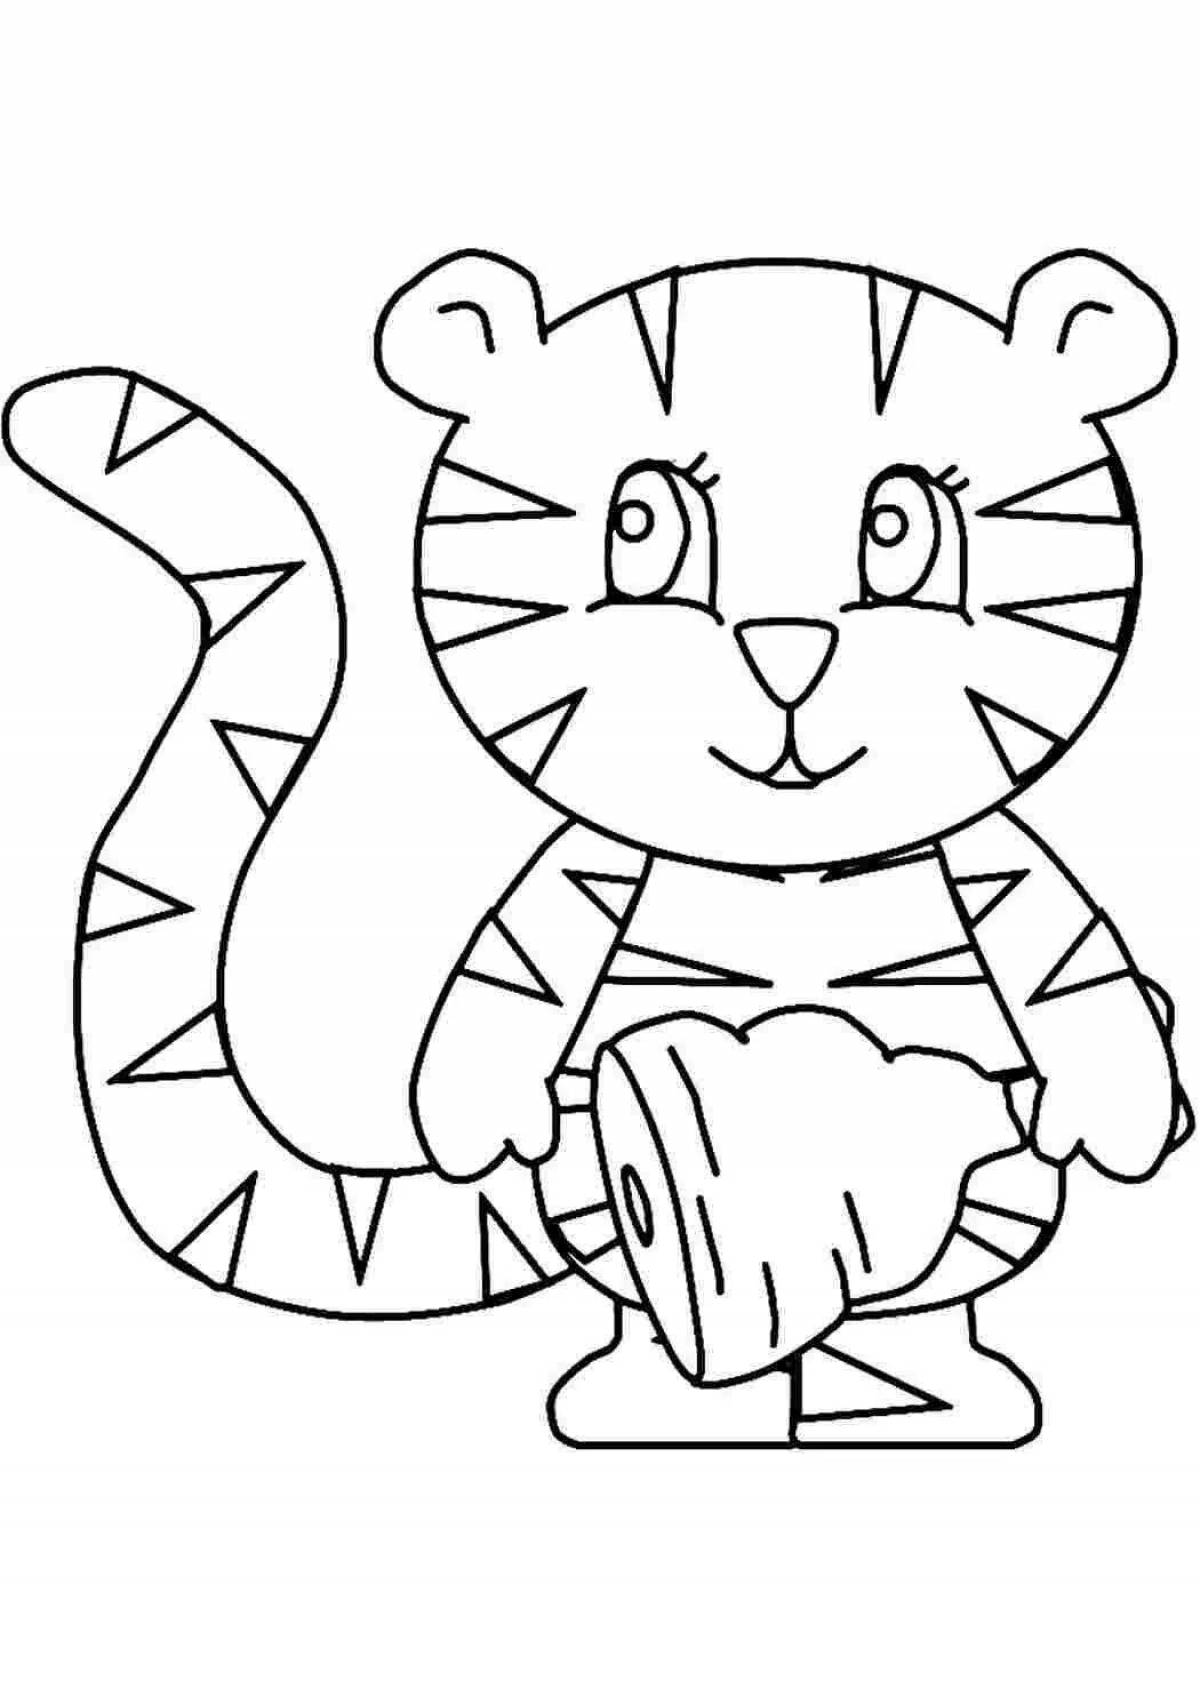 Shiny tiger coloring book for kids